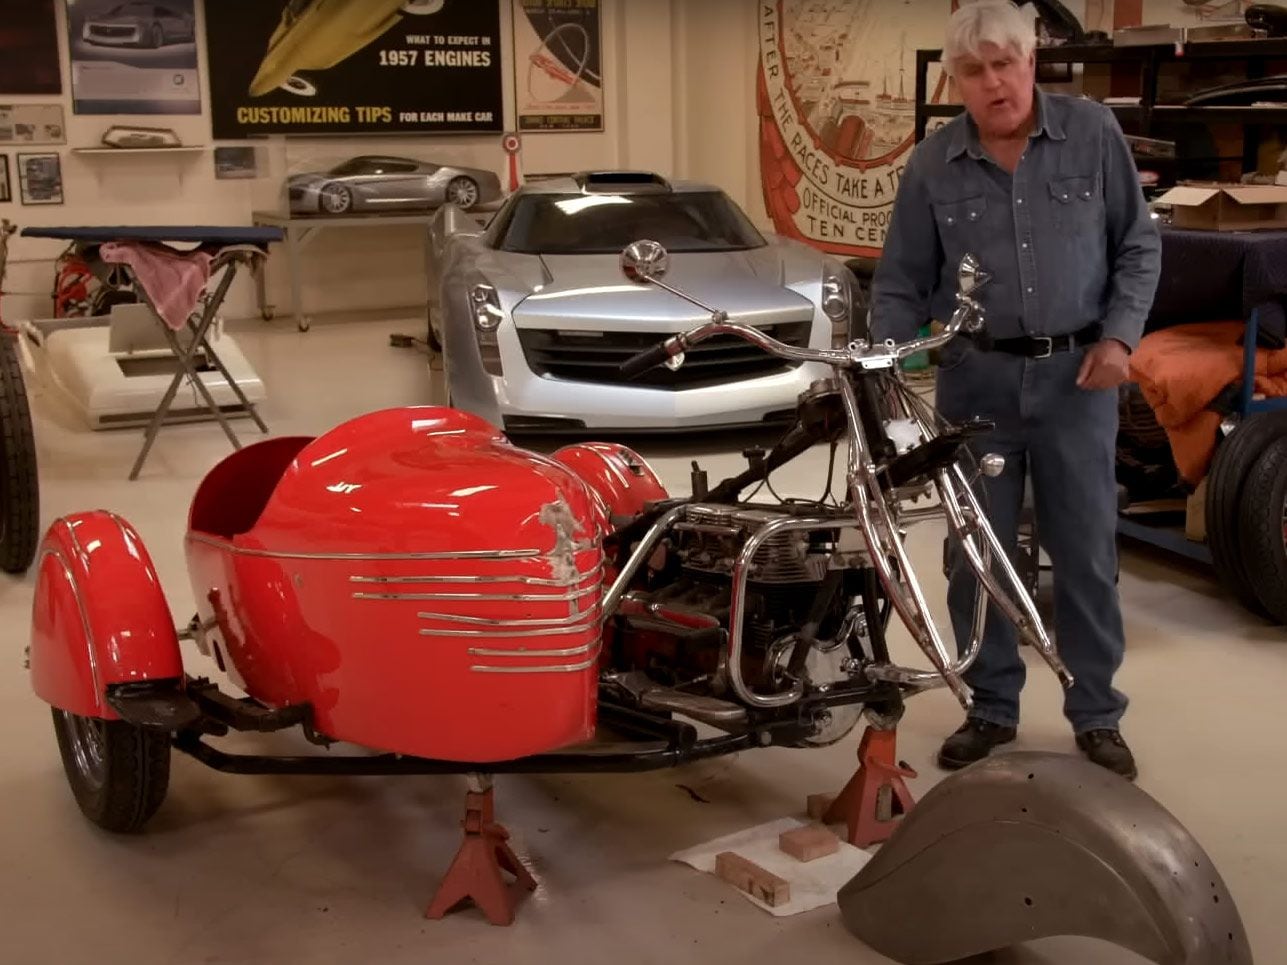 Jay Leno is back at it again after the accident. In a video on Jay Leno’s Garage the comedian is seen walking around his shop showing his upcoming restoration projects, including the 1940 Indian that he crashed.